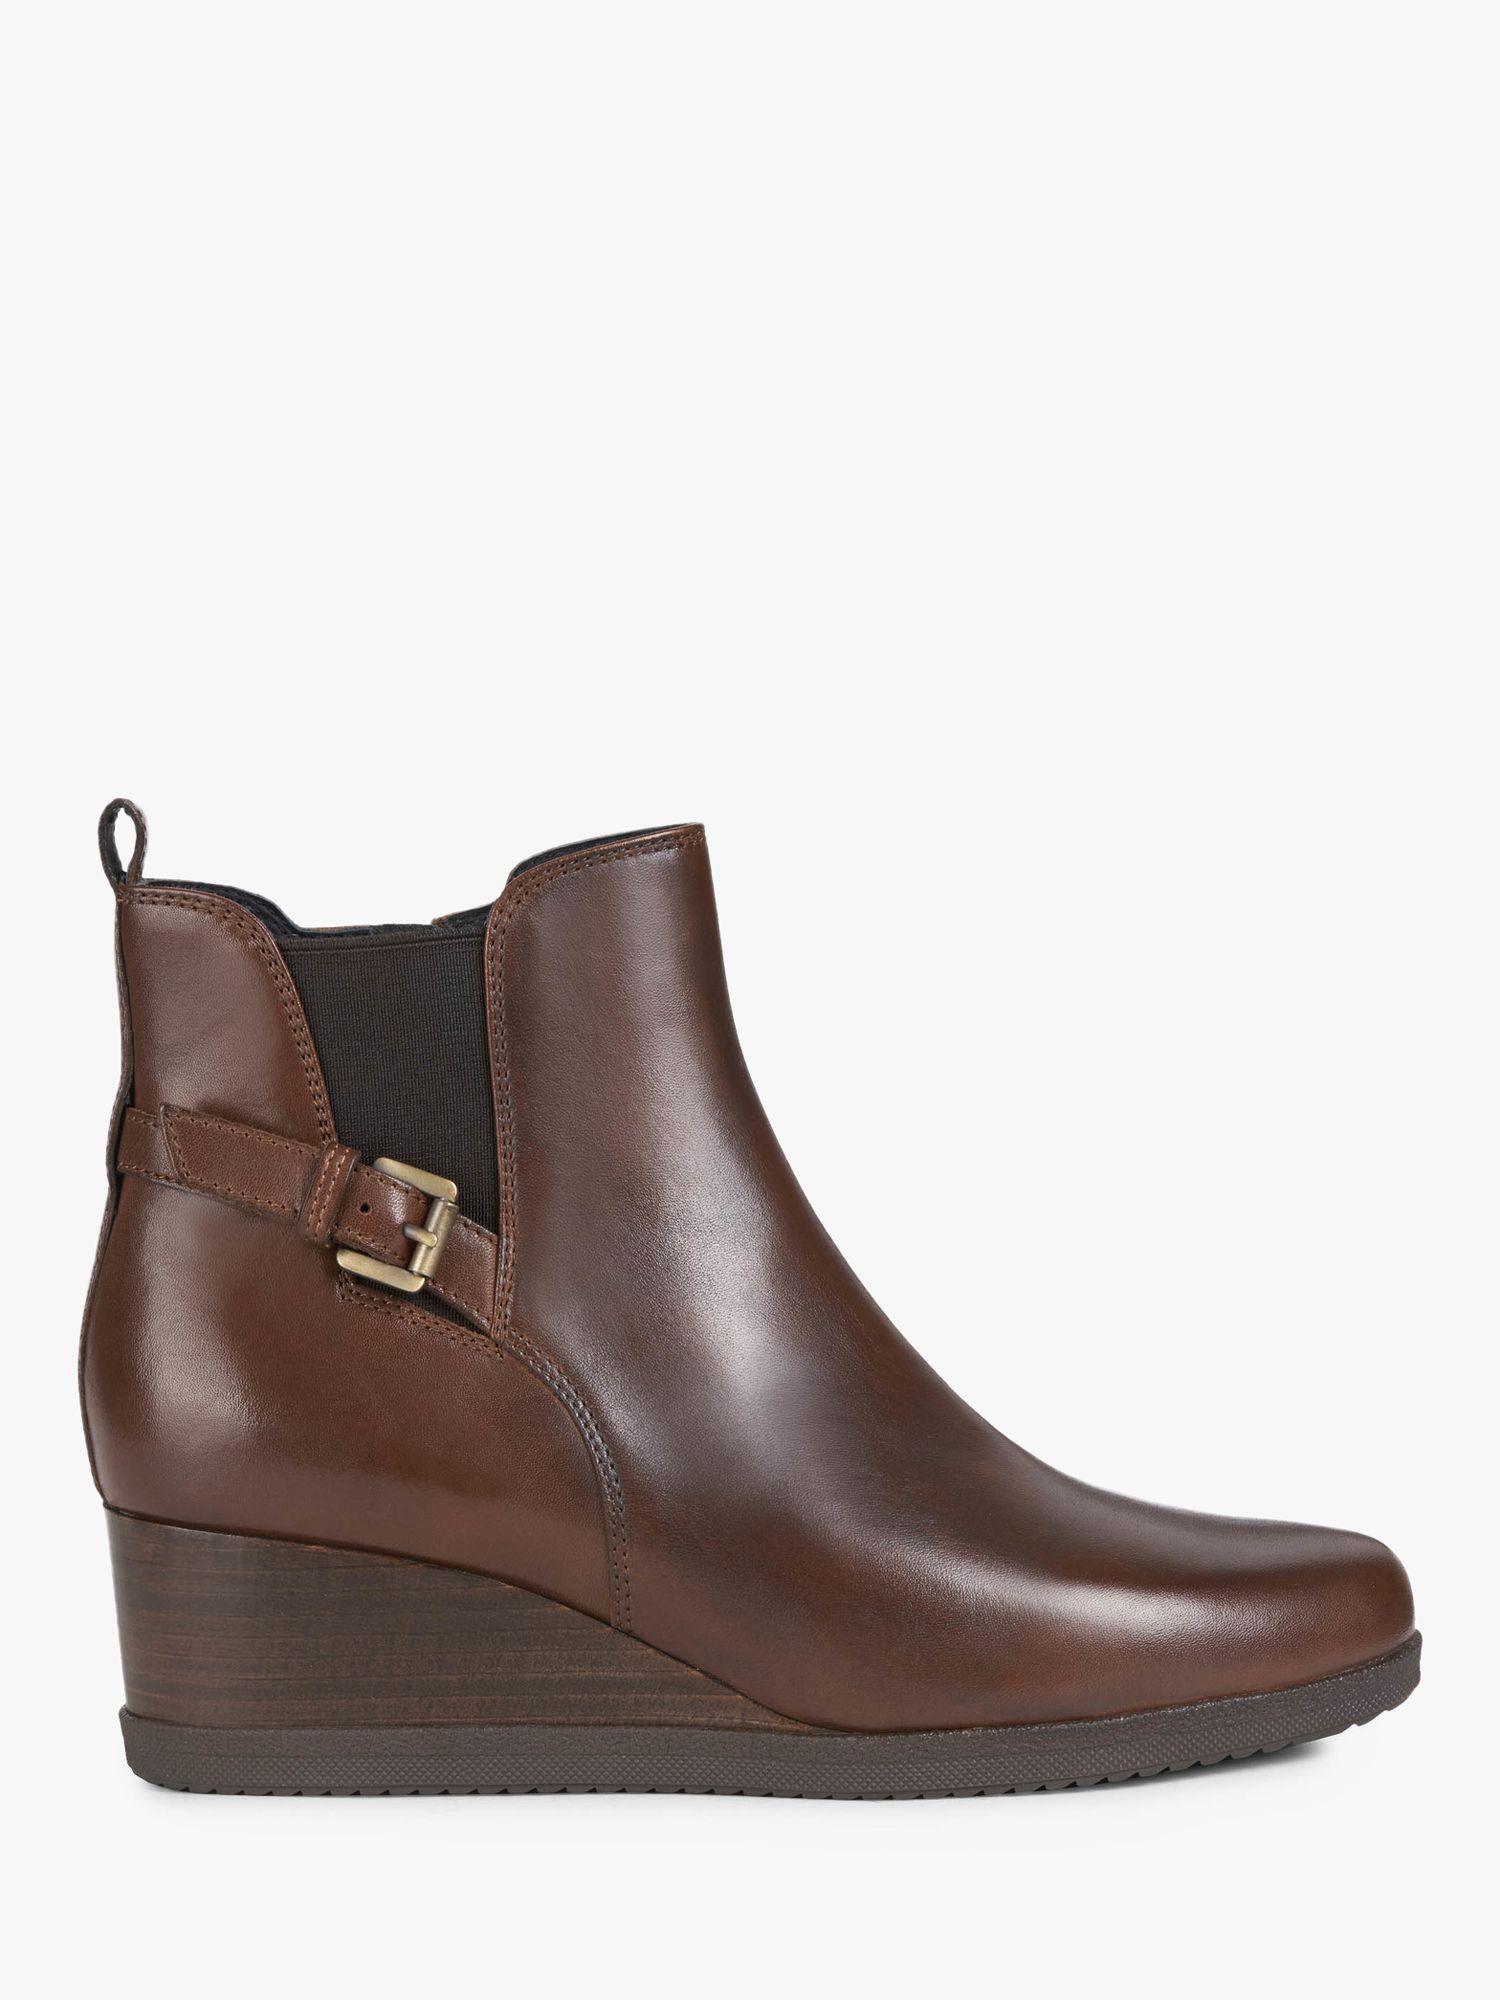 Women's Anylla Leather Wedge Heel Boots, Brown at John & Partners